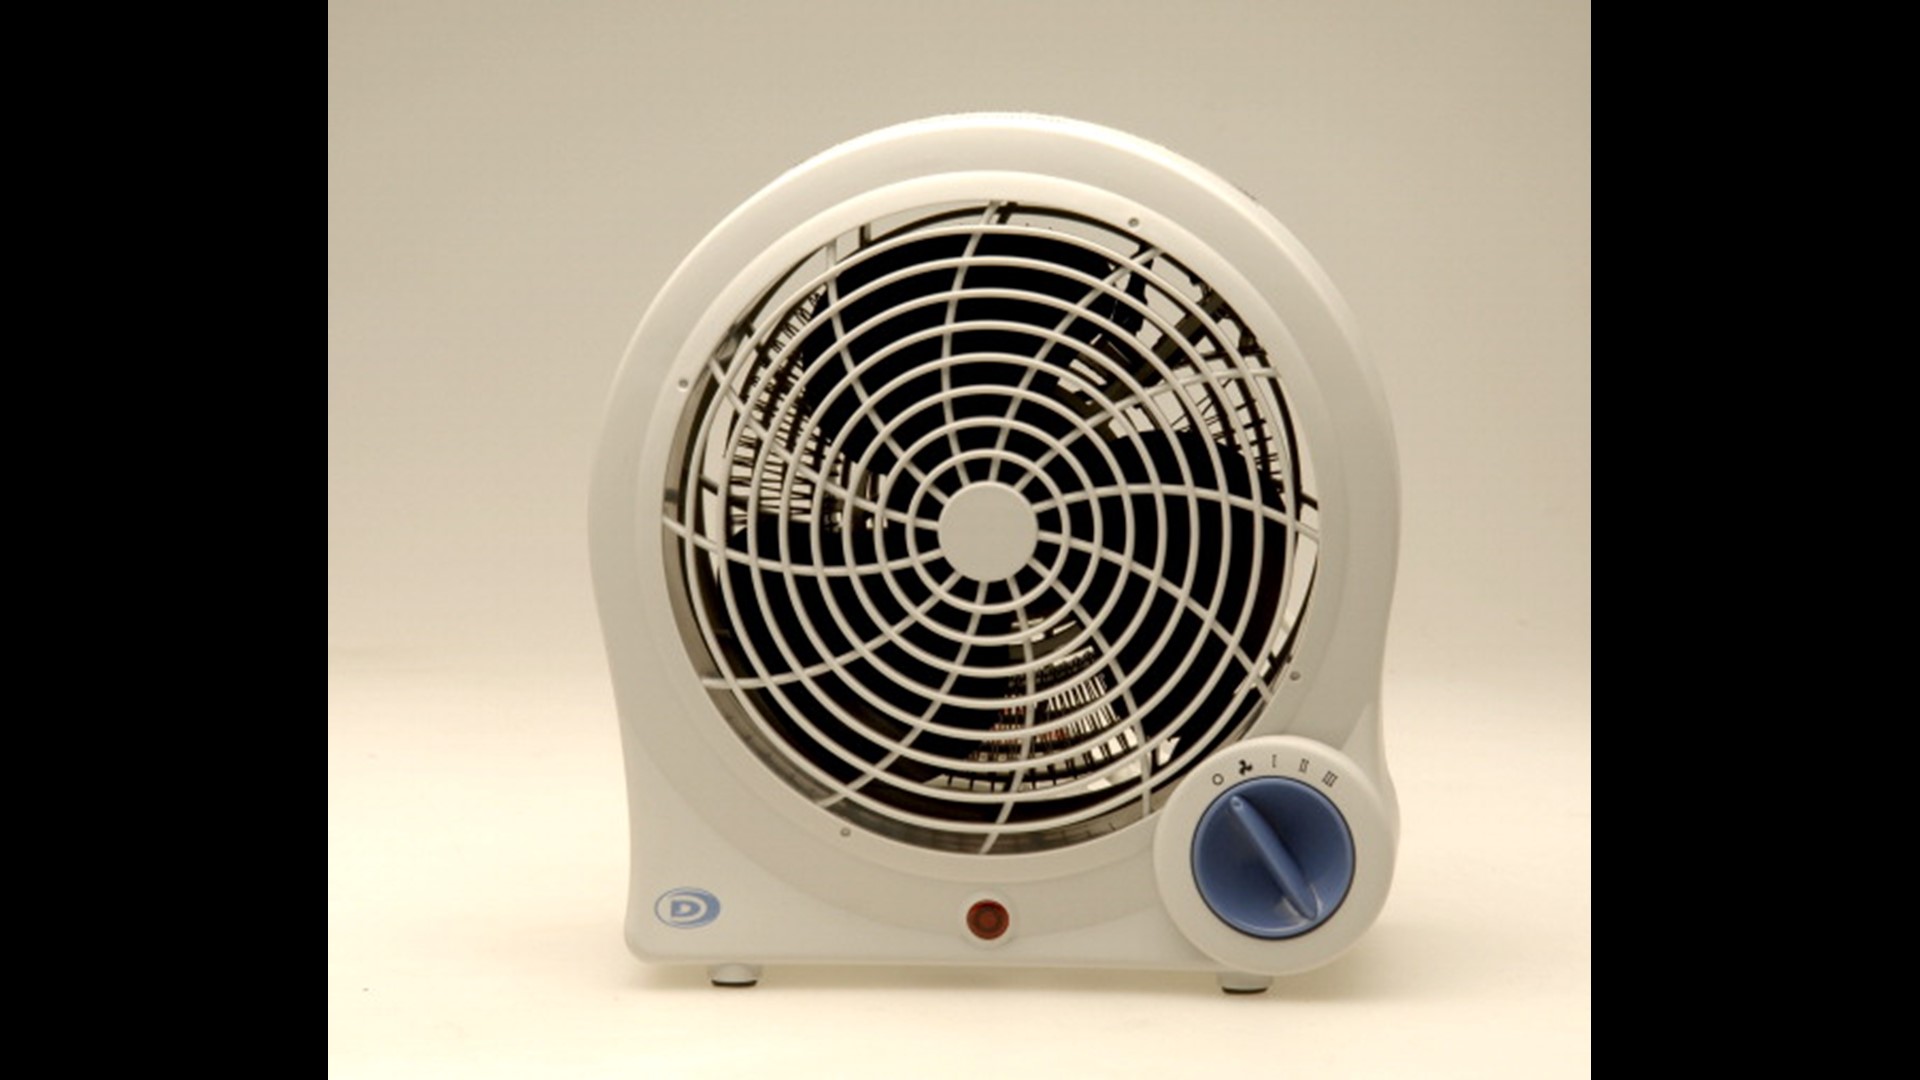 Space heaters can be dropped off at the San Marcos Electric Utility Office through Dec. 22.